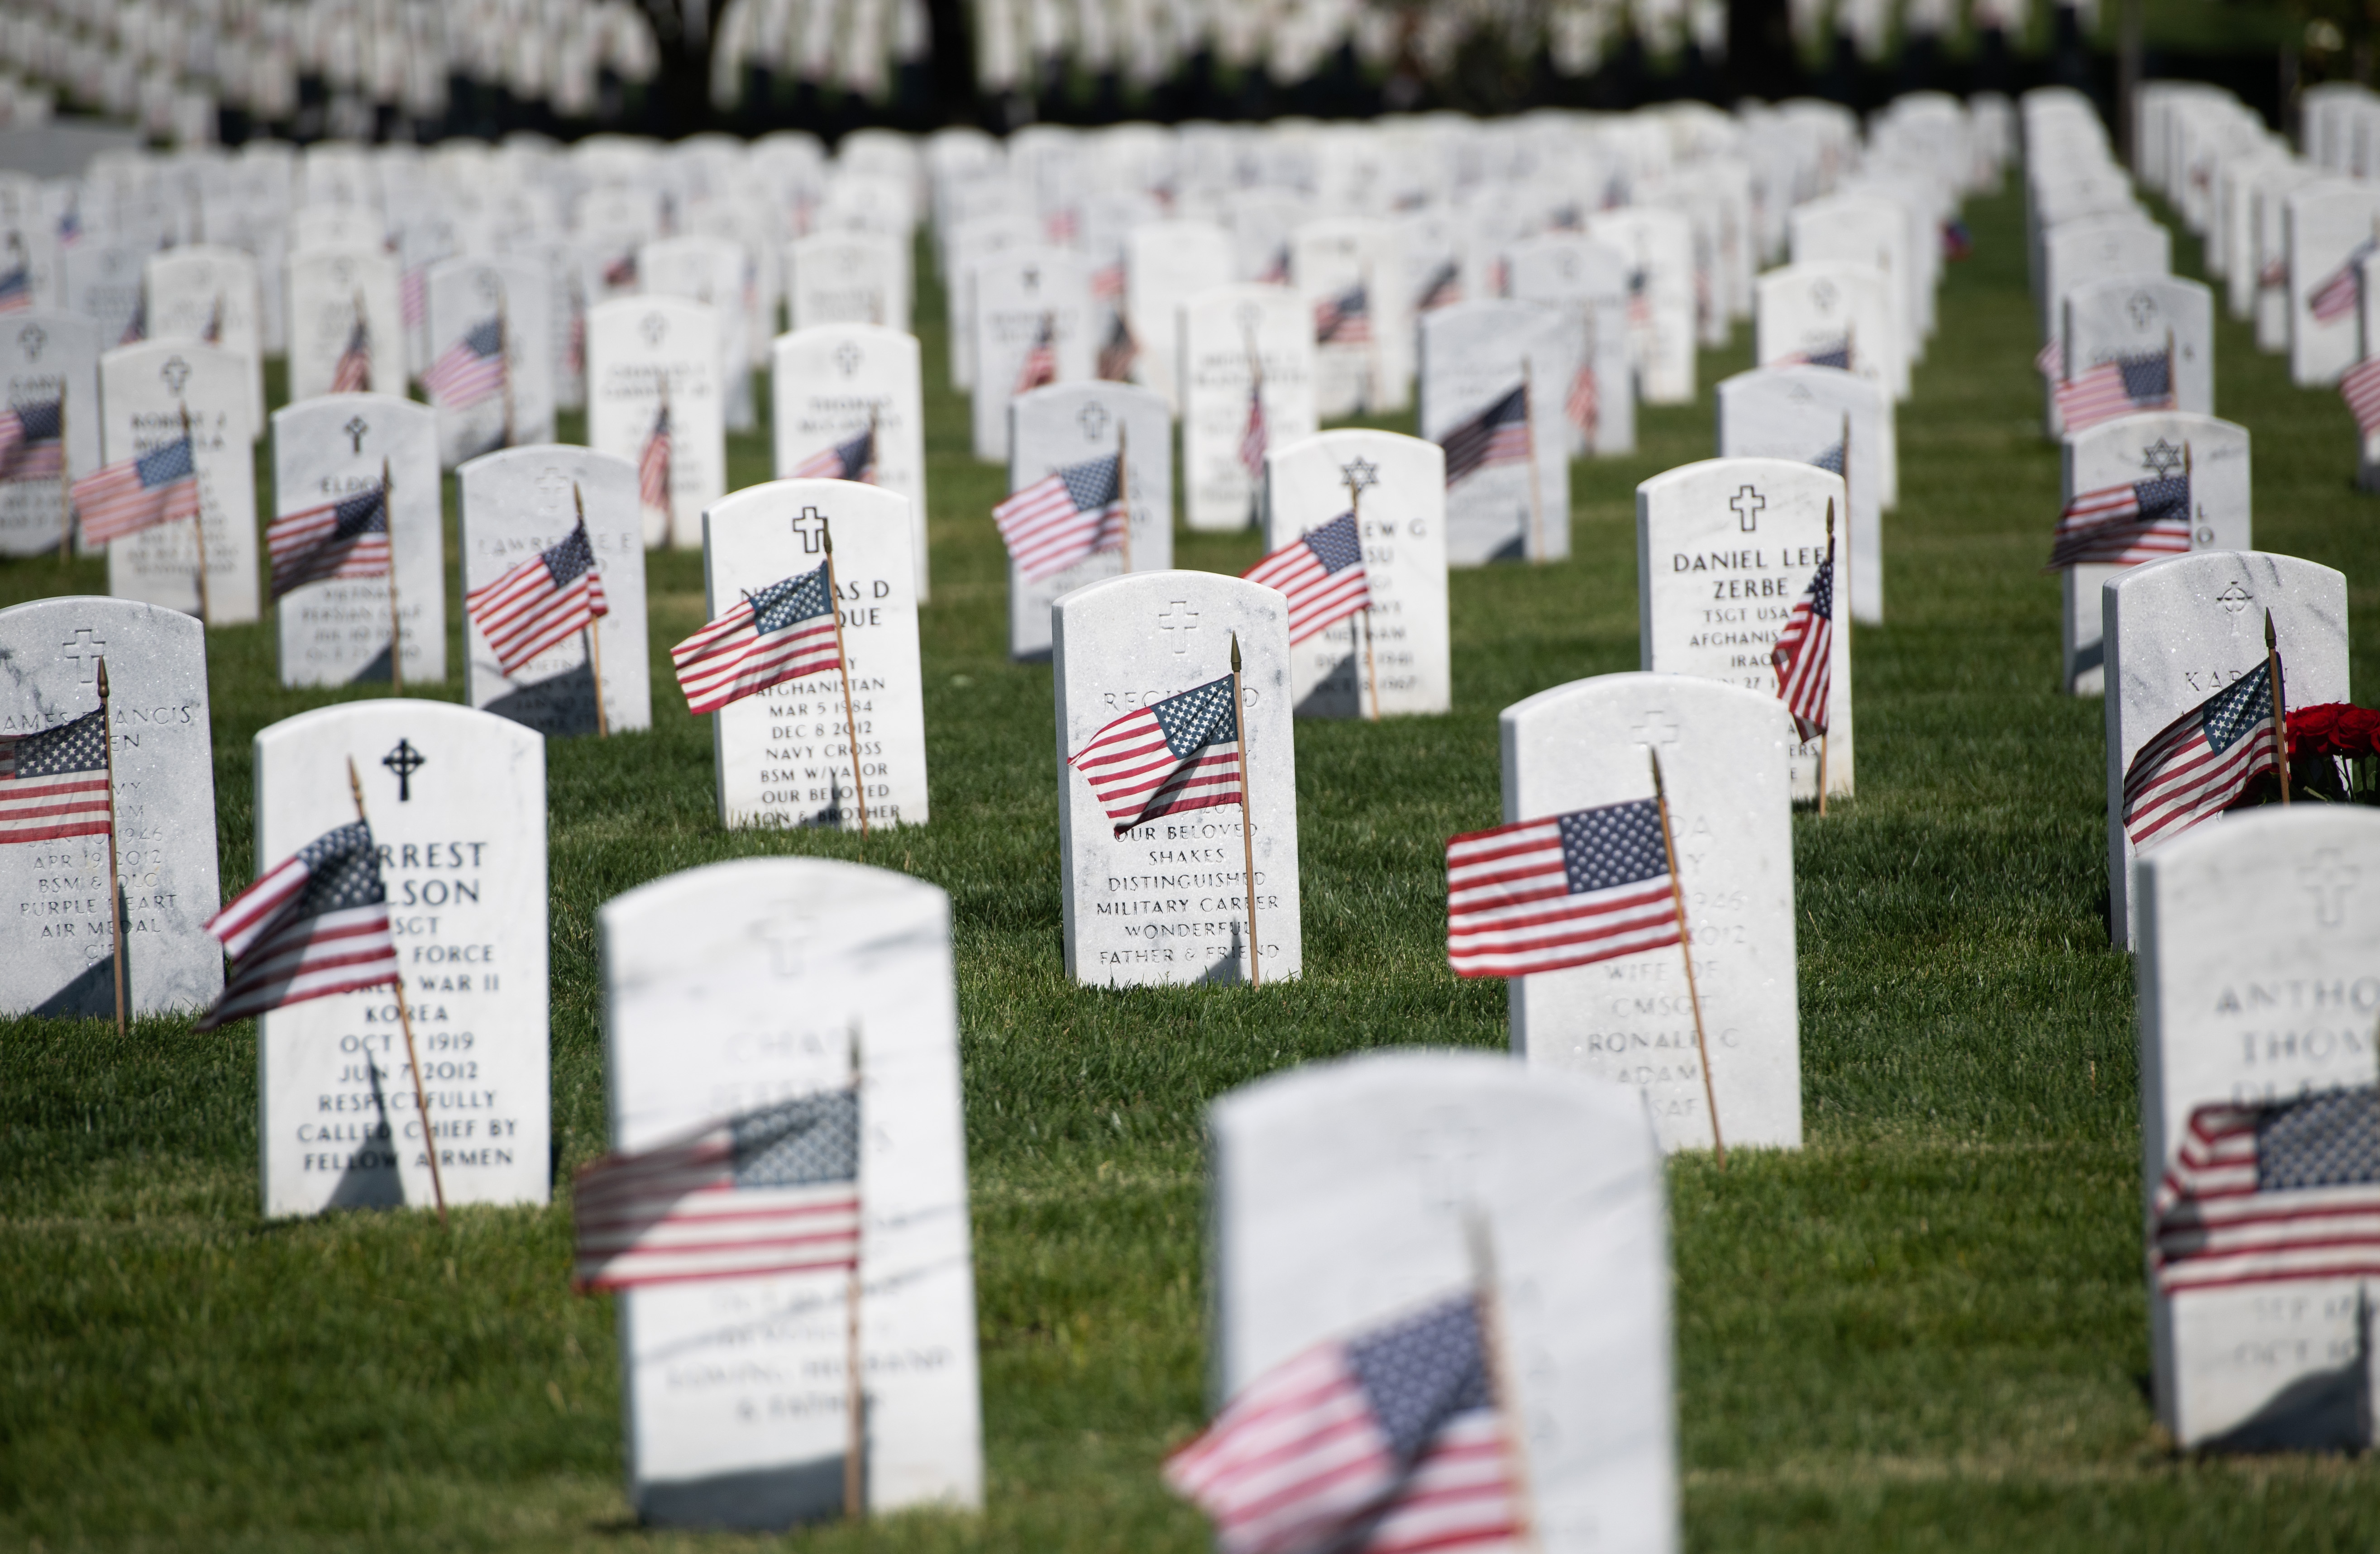 U.S. flags are planted at Arlington National Cemetery on May 24, 2019. (Saul Loeb/AFP/Getty Images)